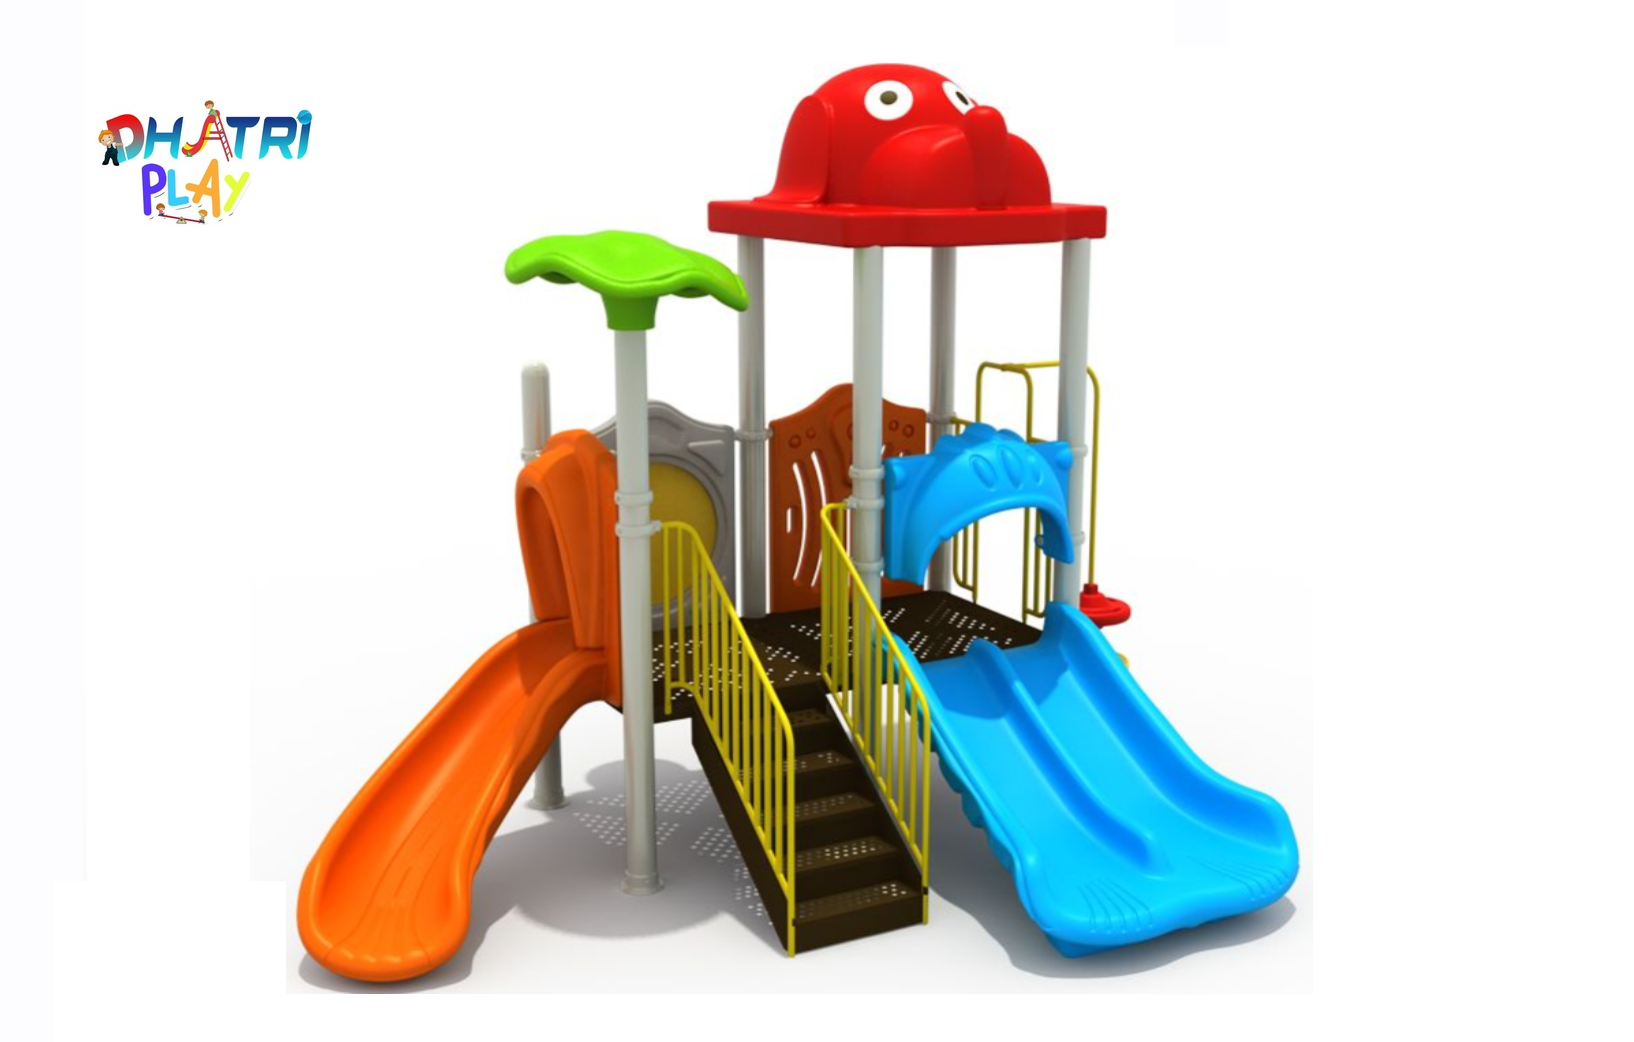 Best Double Twister Standing Manufacturer in Hyderabad